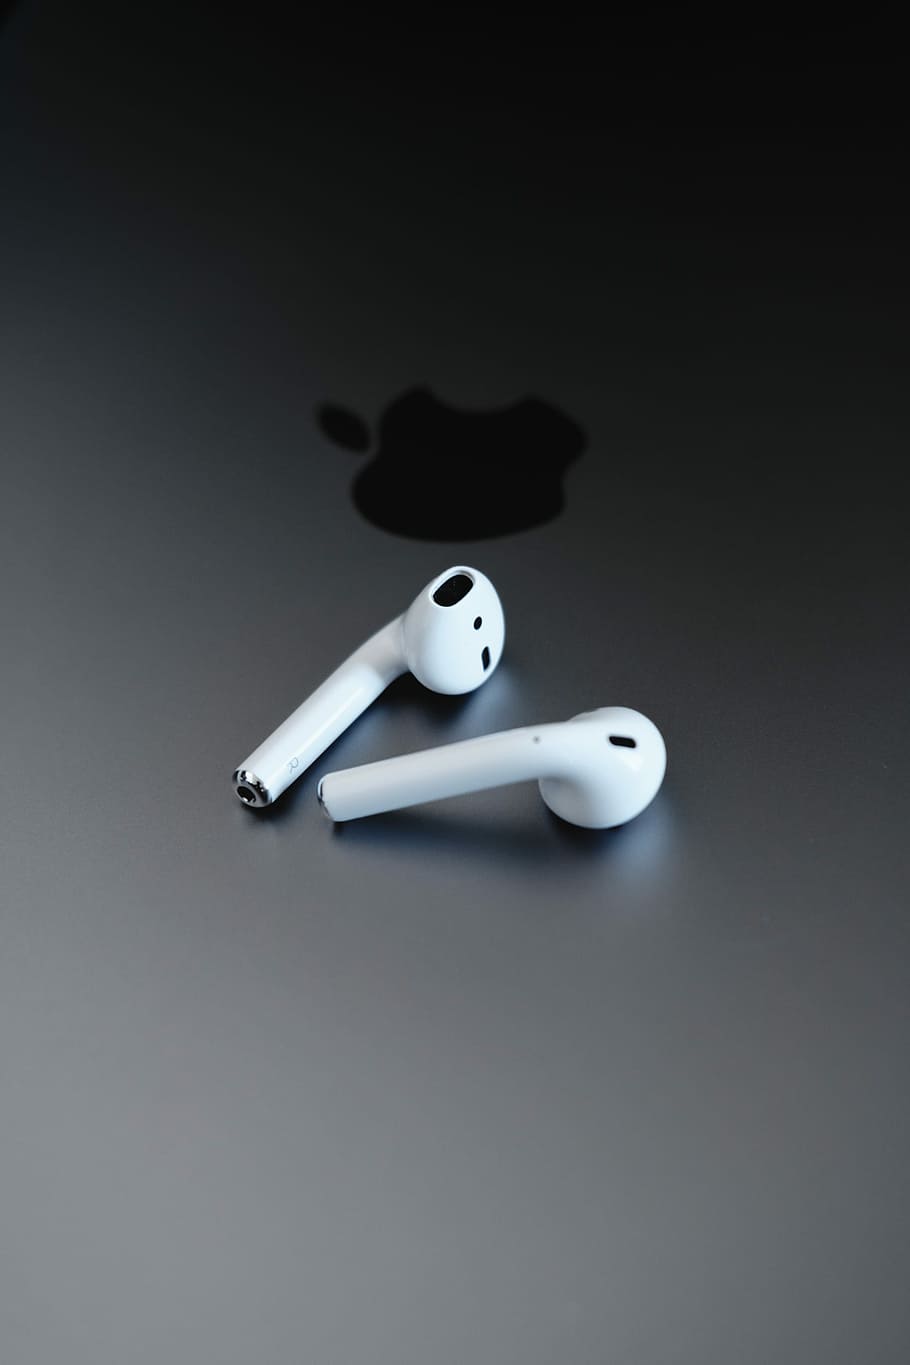 Airpods Photos Download The BEST Free Airpods Stock Photos  HD Images